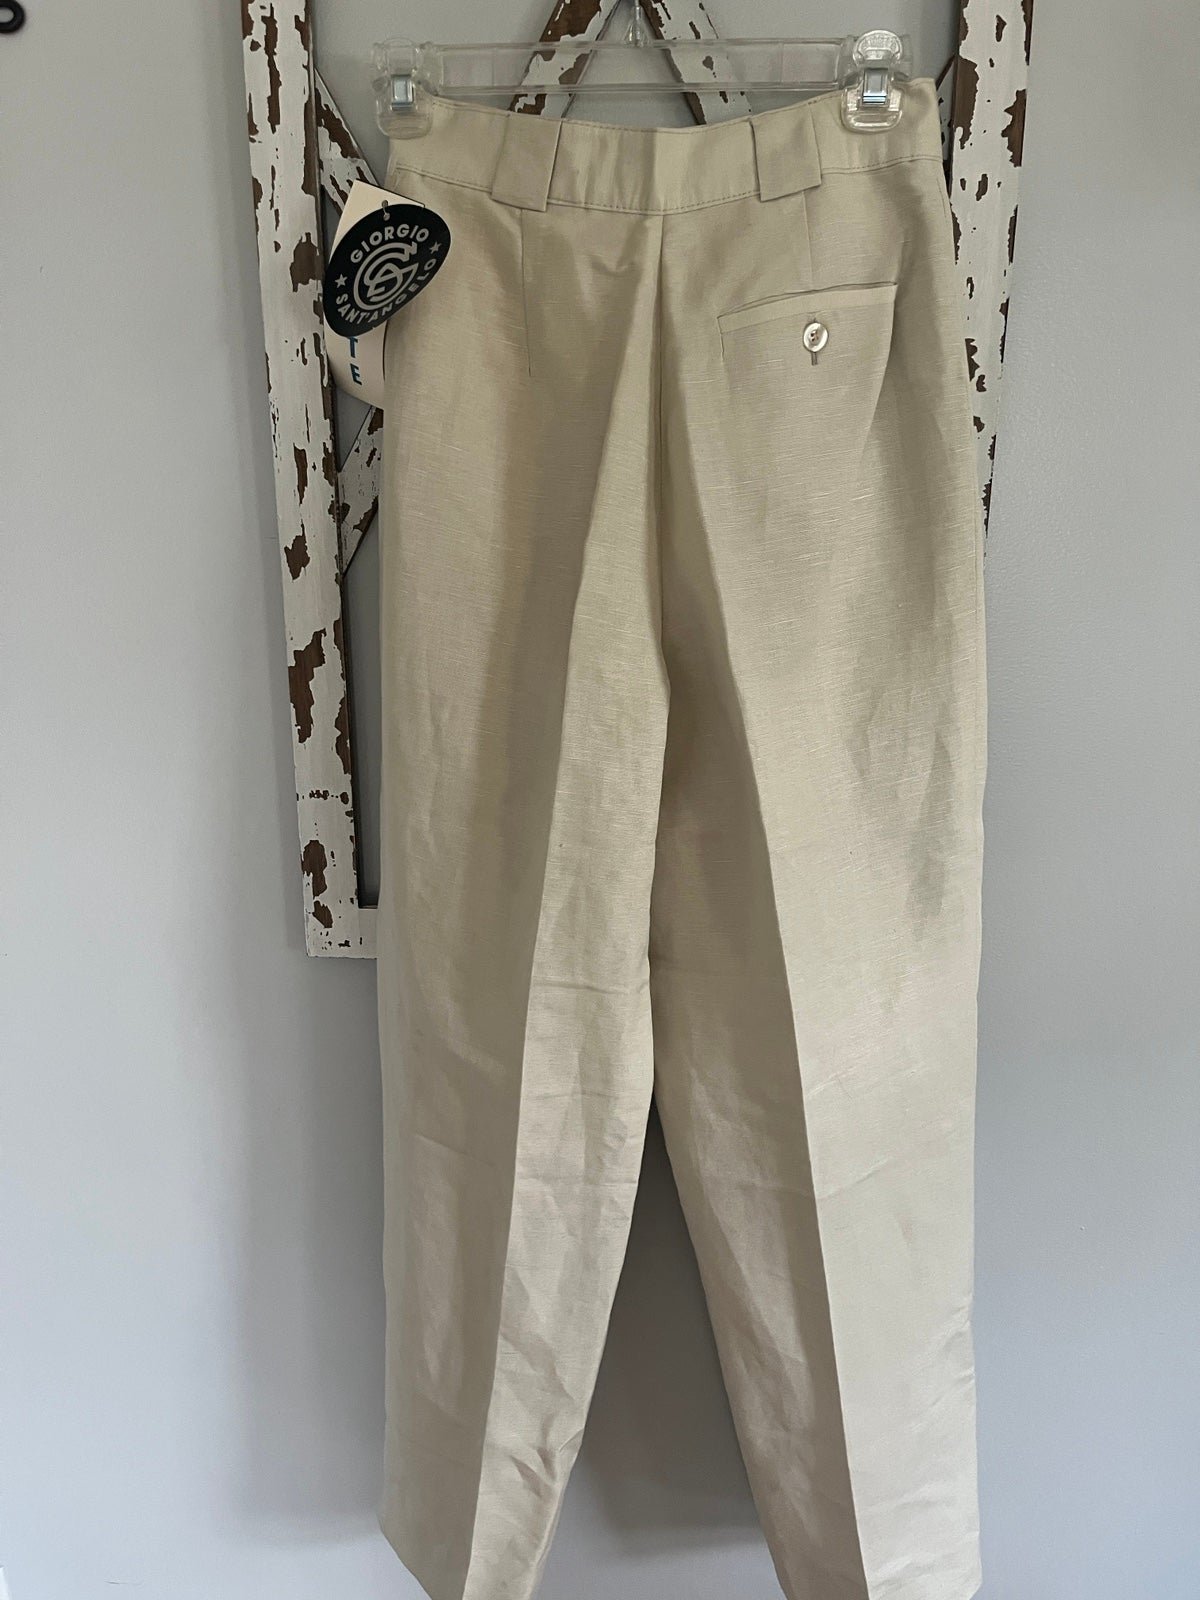 the Lowest price Giorgio Sant´ Angelo Linen Blend Woman´s Pants Pleated Lined NWT Size 6 Petite mPbEnoJXn Fashion